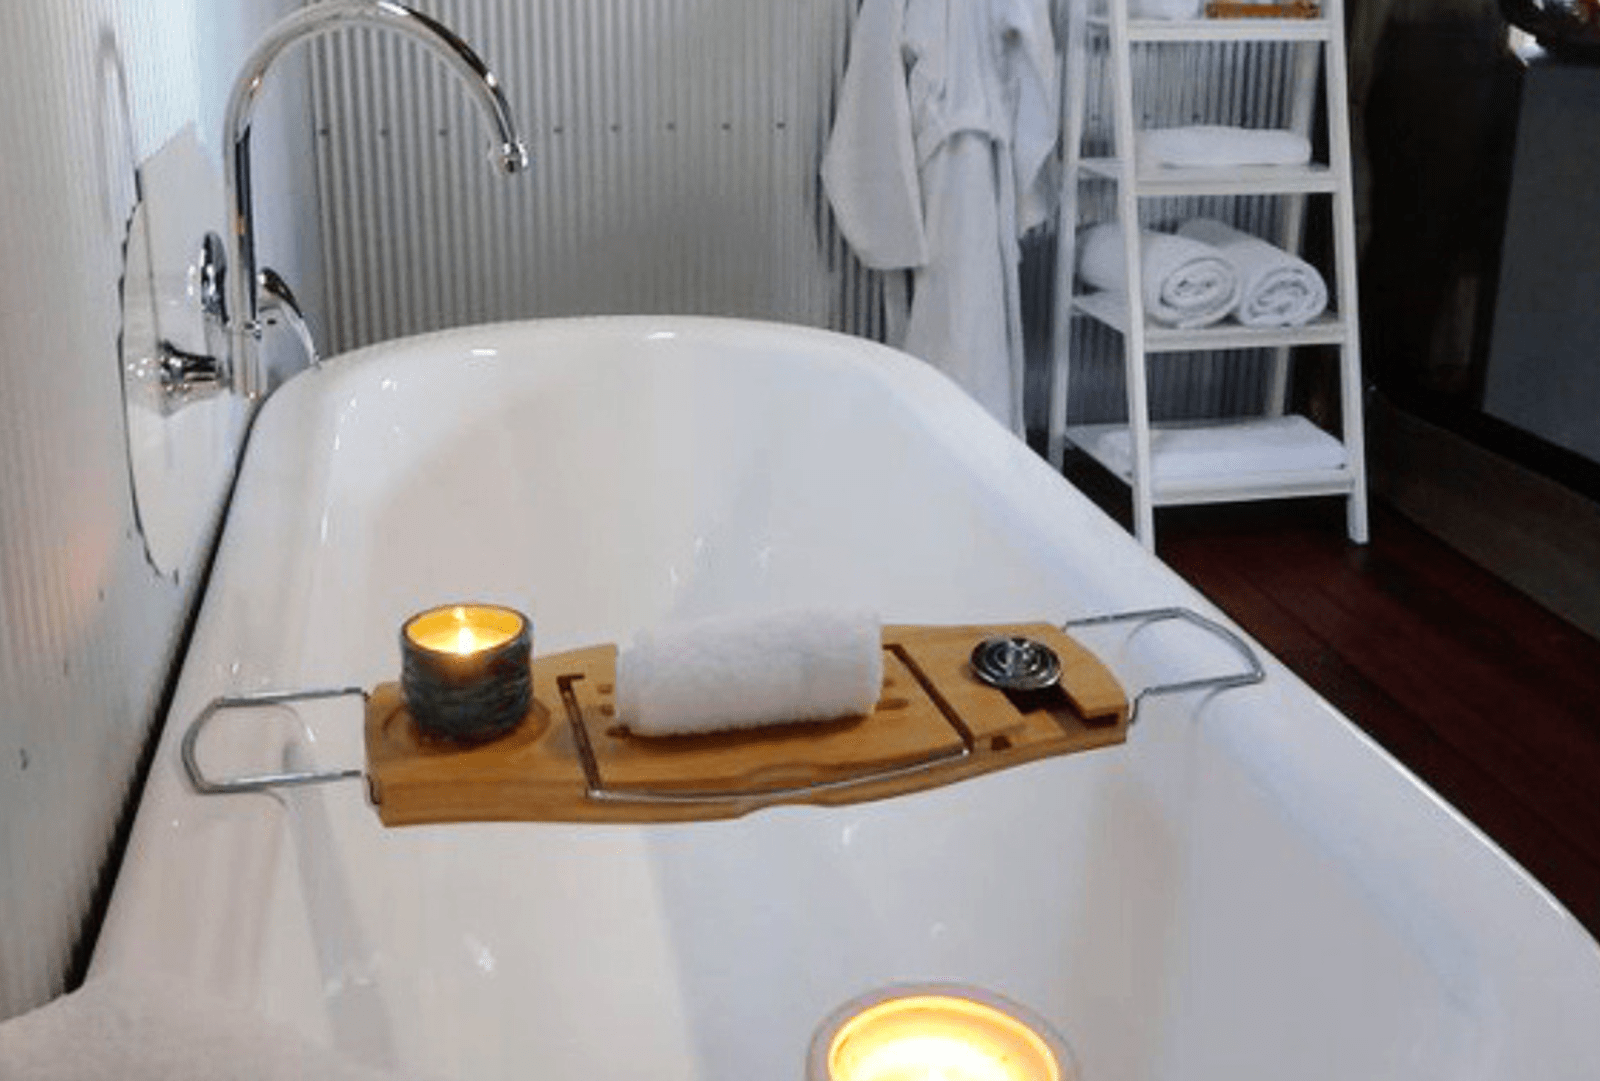 A bath tub with a tray on top filled with hot towel and scented candle